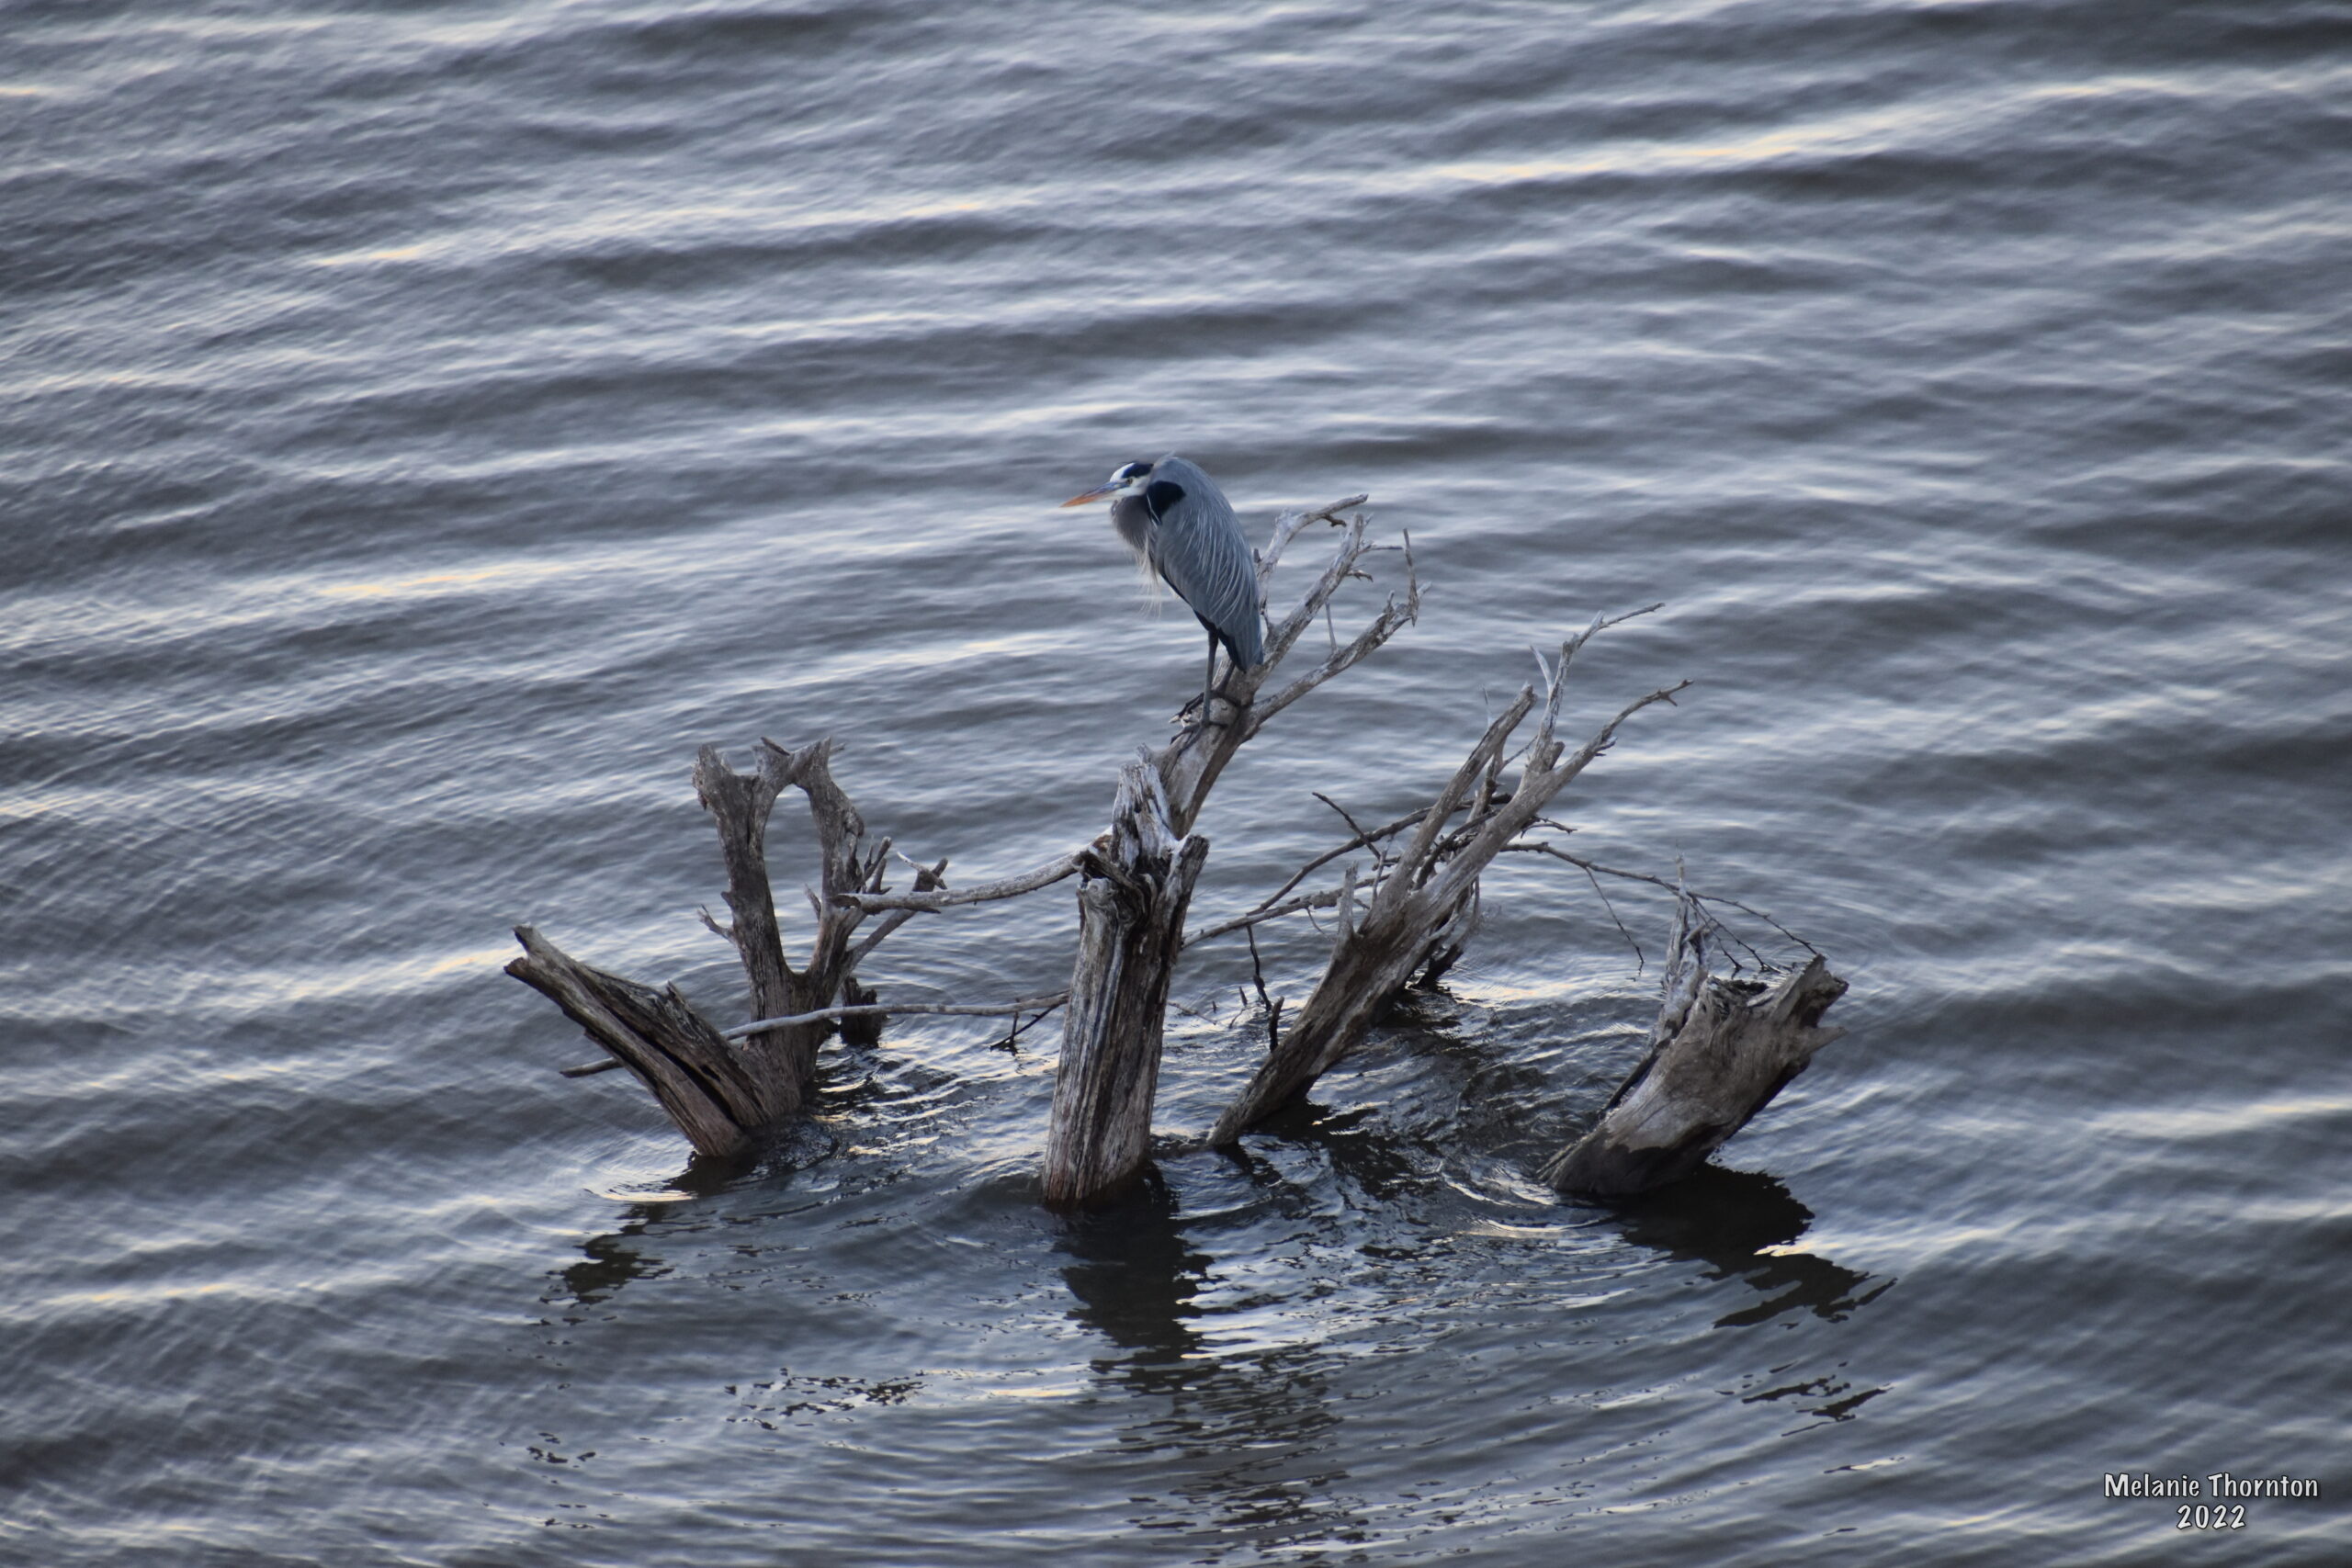 A large gray bird with long spindly  legs and a long beak stands on the limb of a dead bush in the water